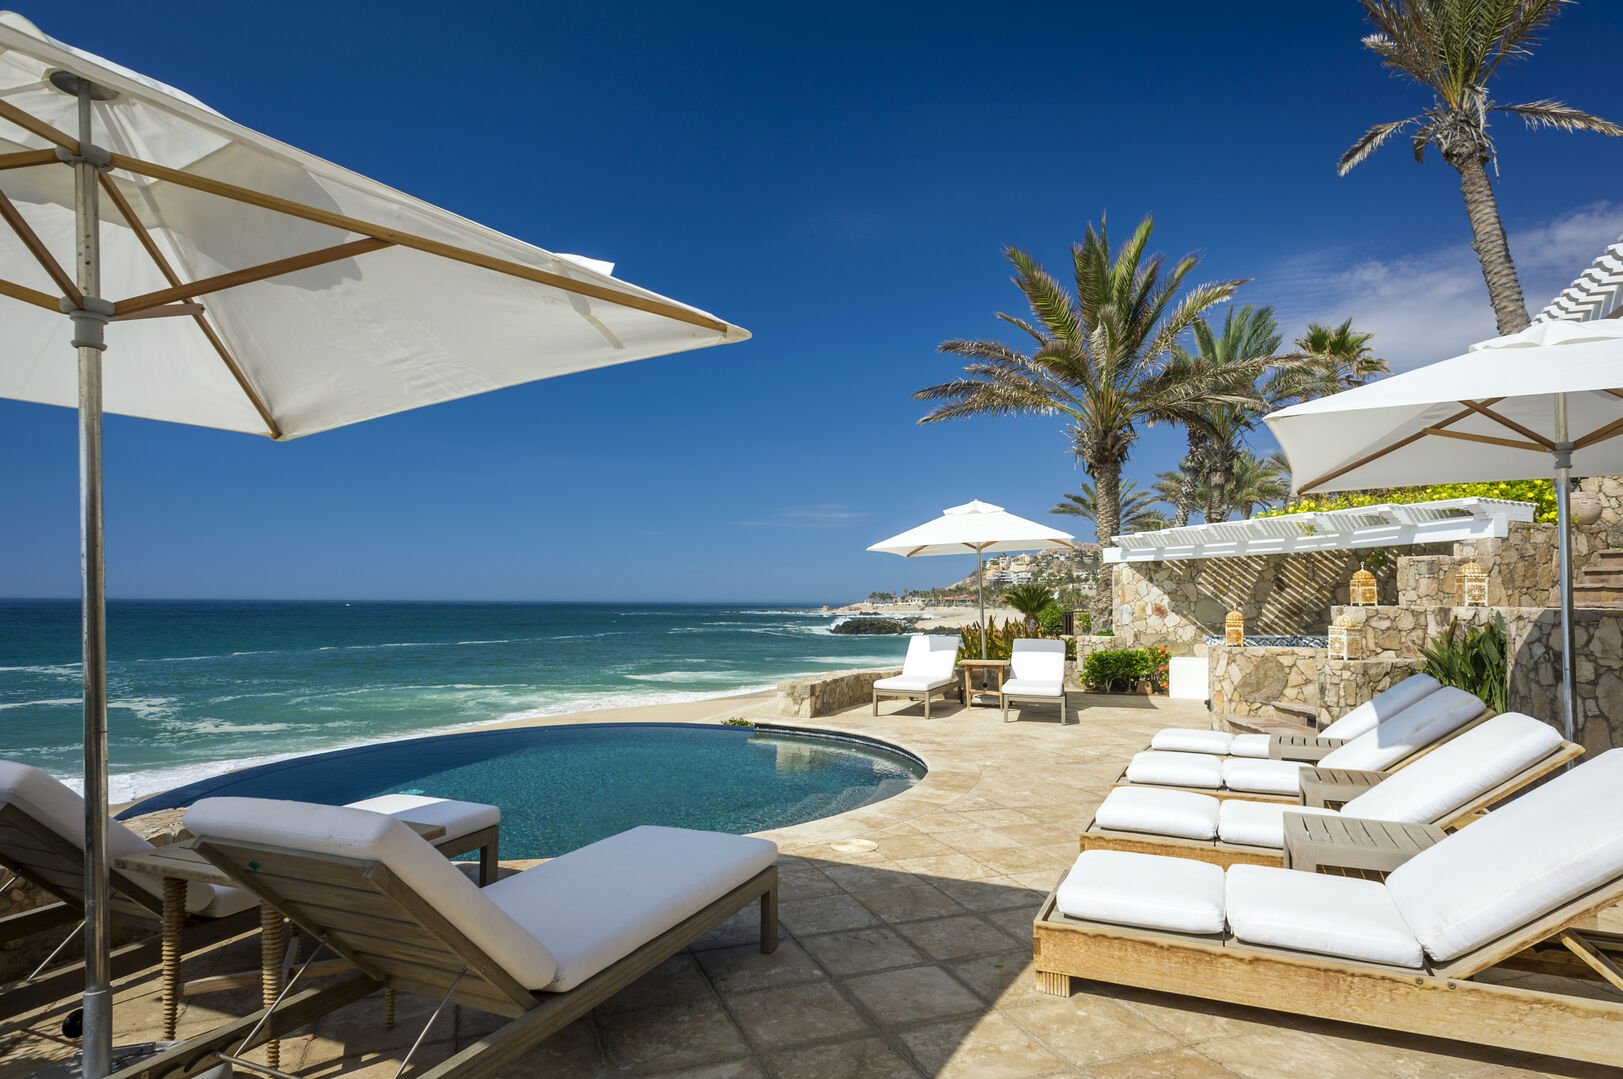 White lounge chairs by the pool overlooking the sea